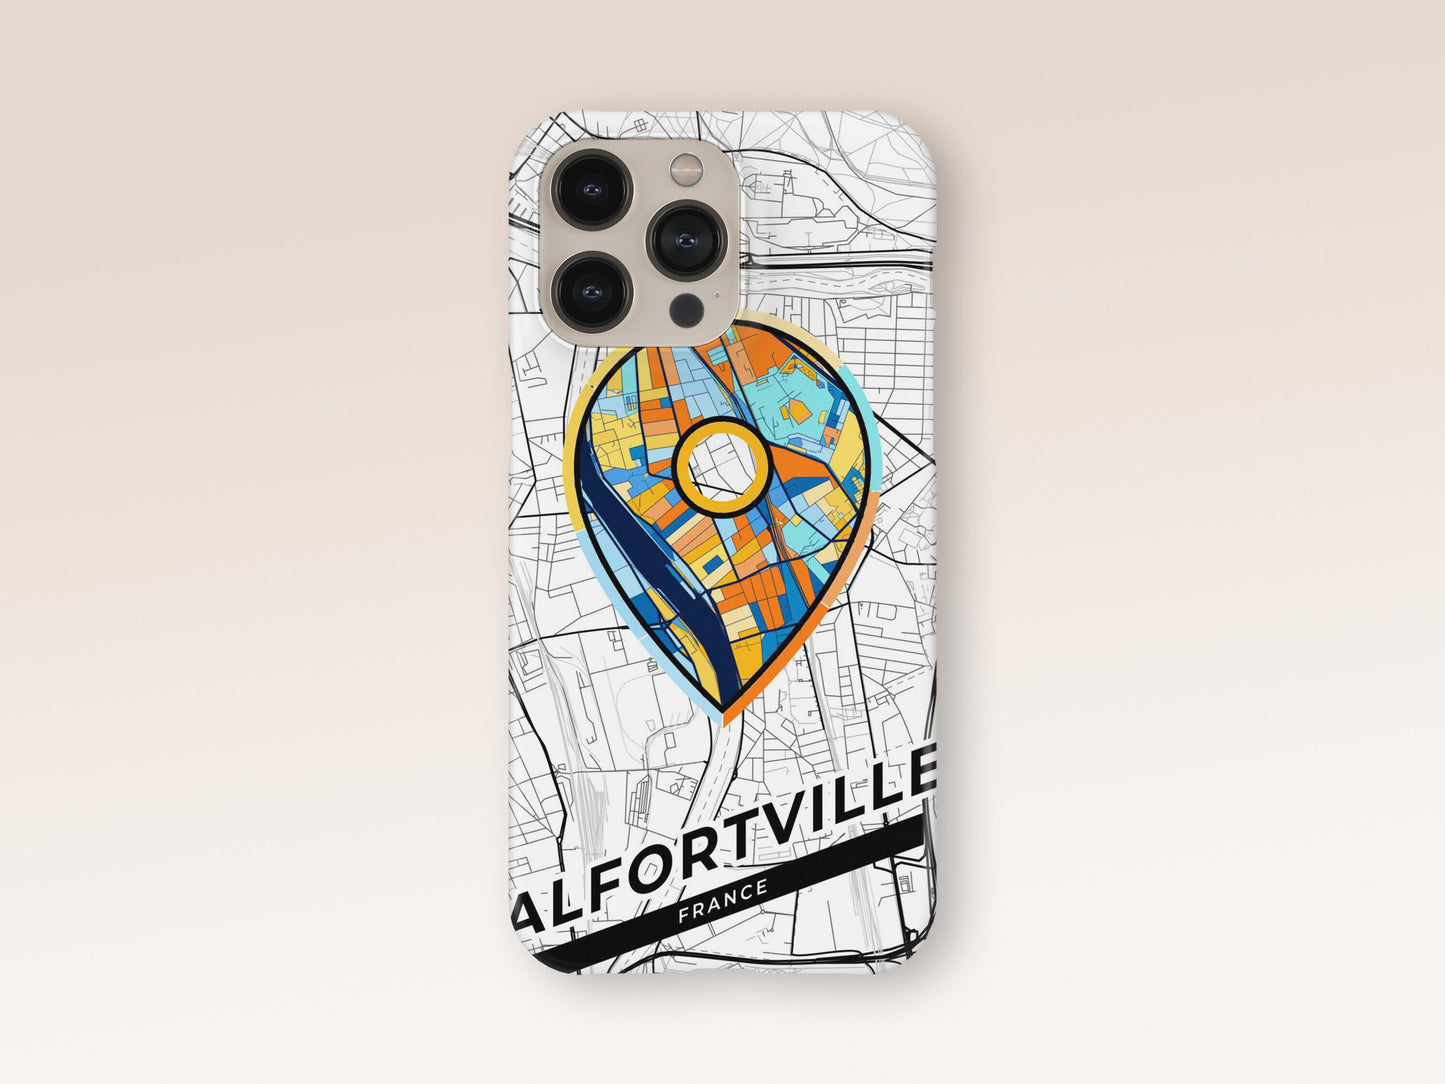 Alfortville France slim phone case with colorful icon. Birthday, wedding or housewarming gift. Couple match cases. 1